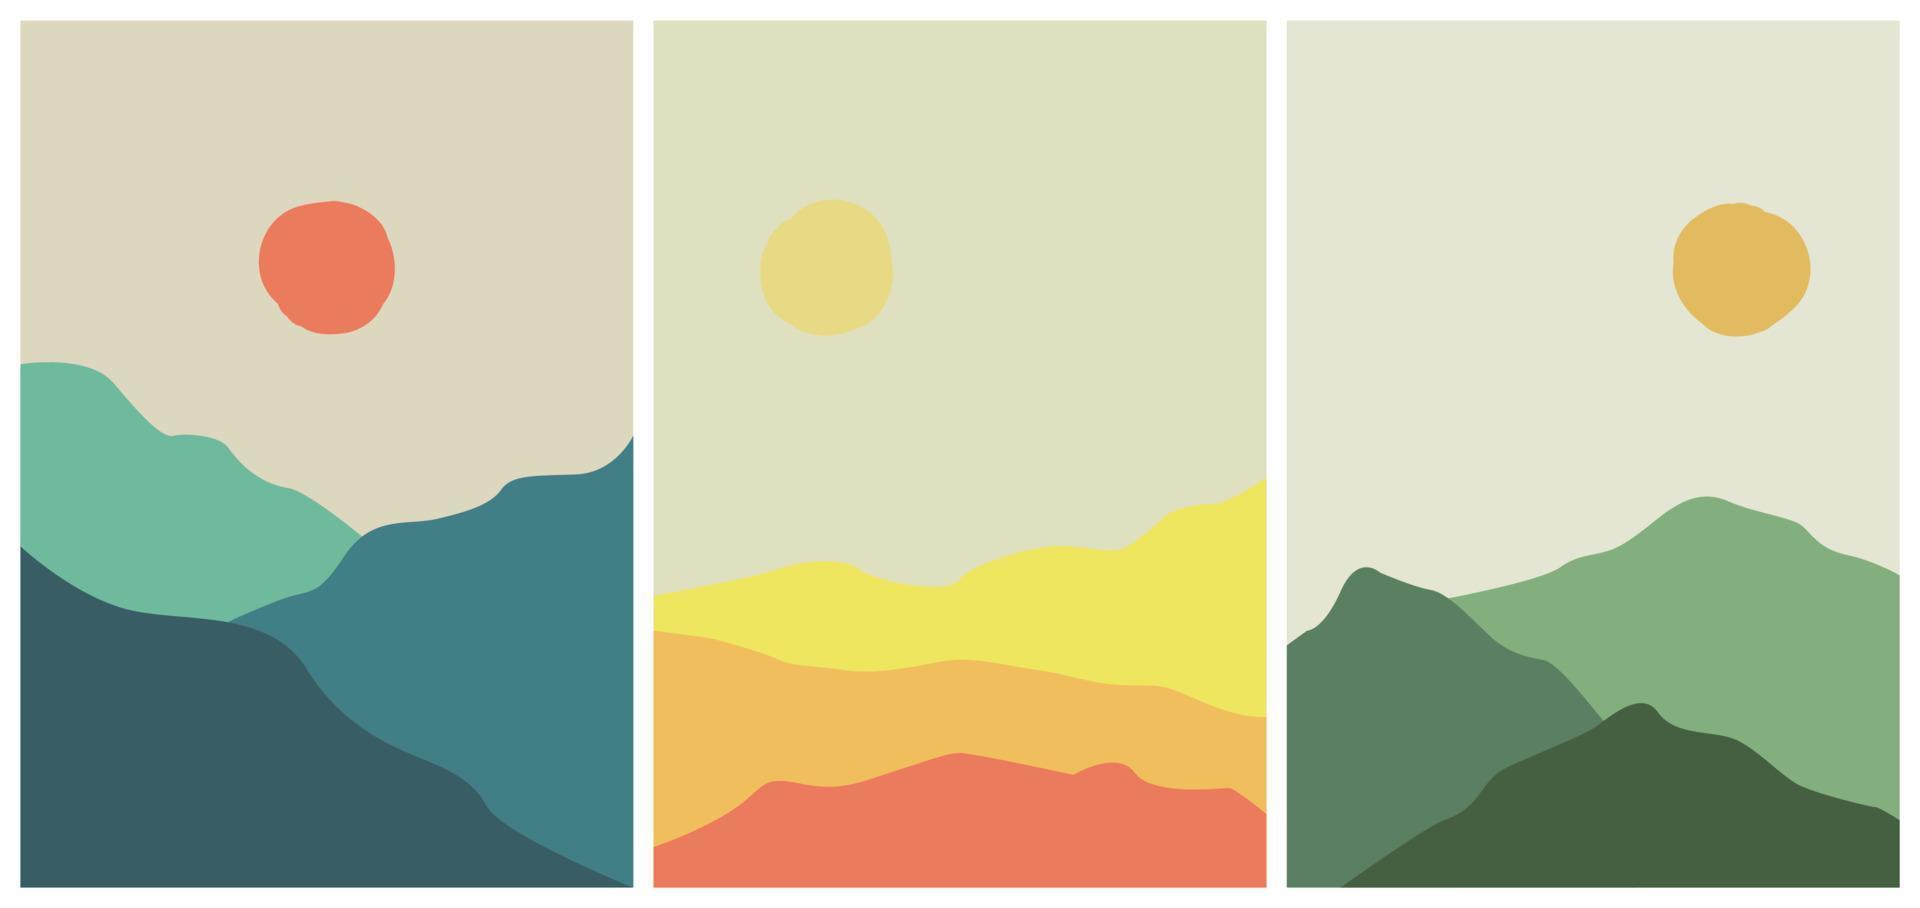 Three 3 abstract flat design background collection. Contemporary aesthetic vector illustration. Mountain and hill lanscape with vintage color tone. For book cover, poster, banner, brochure, flyer.